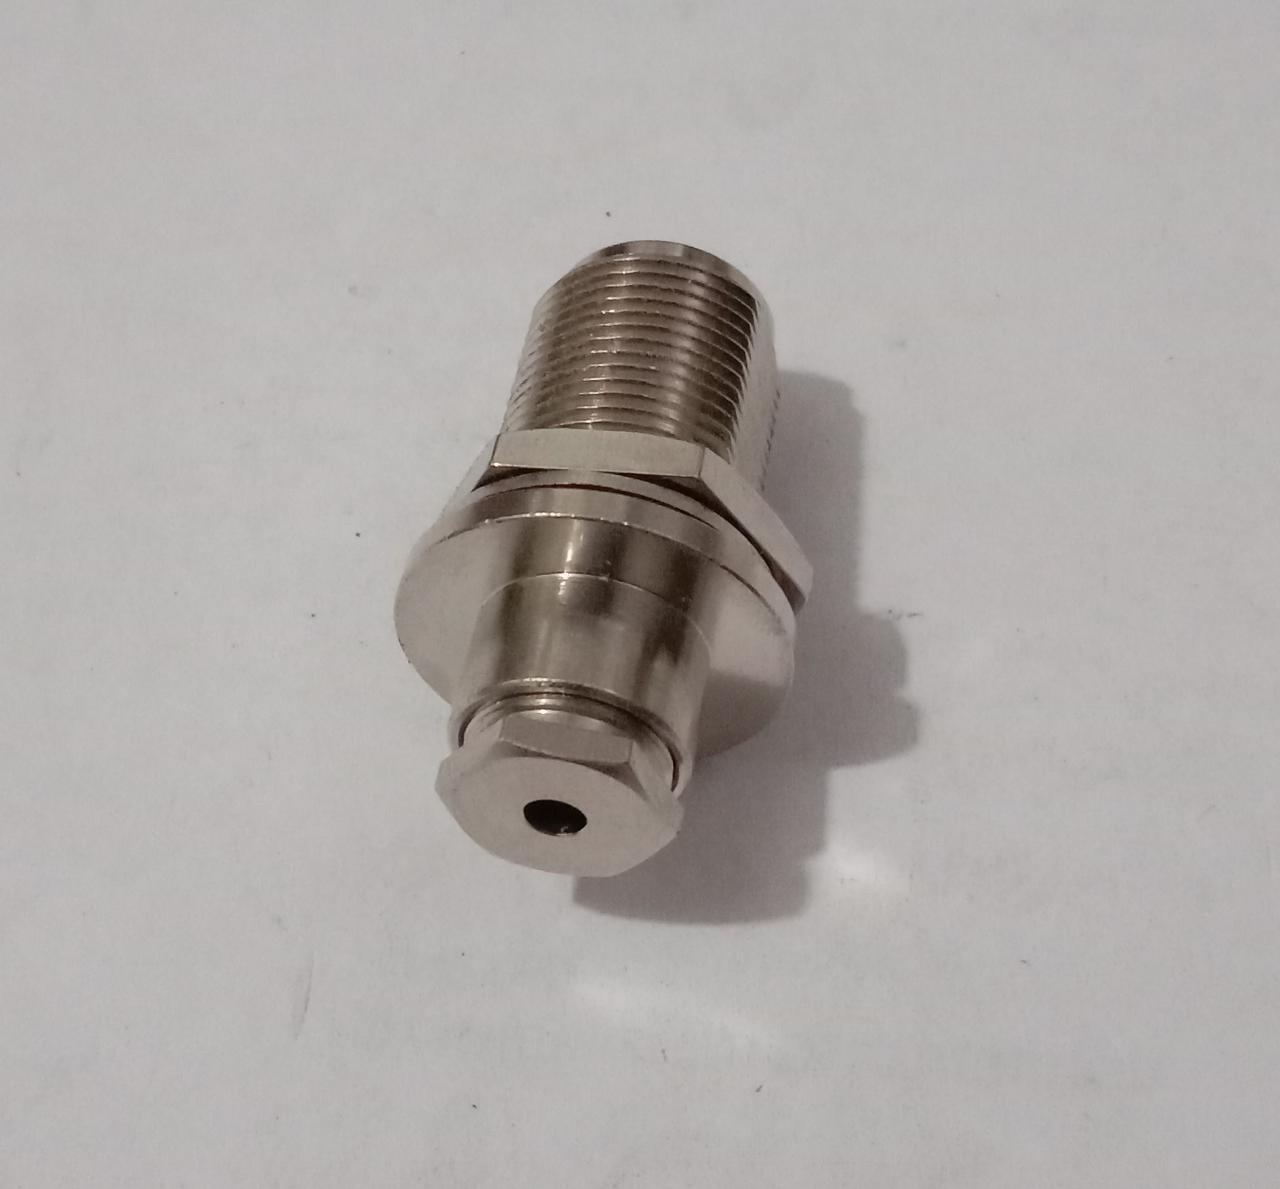 N Female Bulkhead Connector for RG 141 Suco Cable